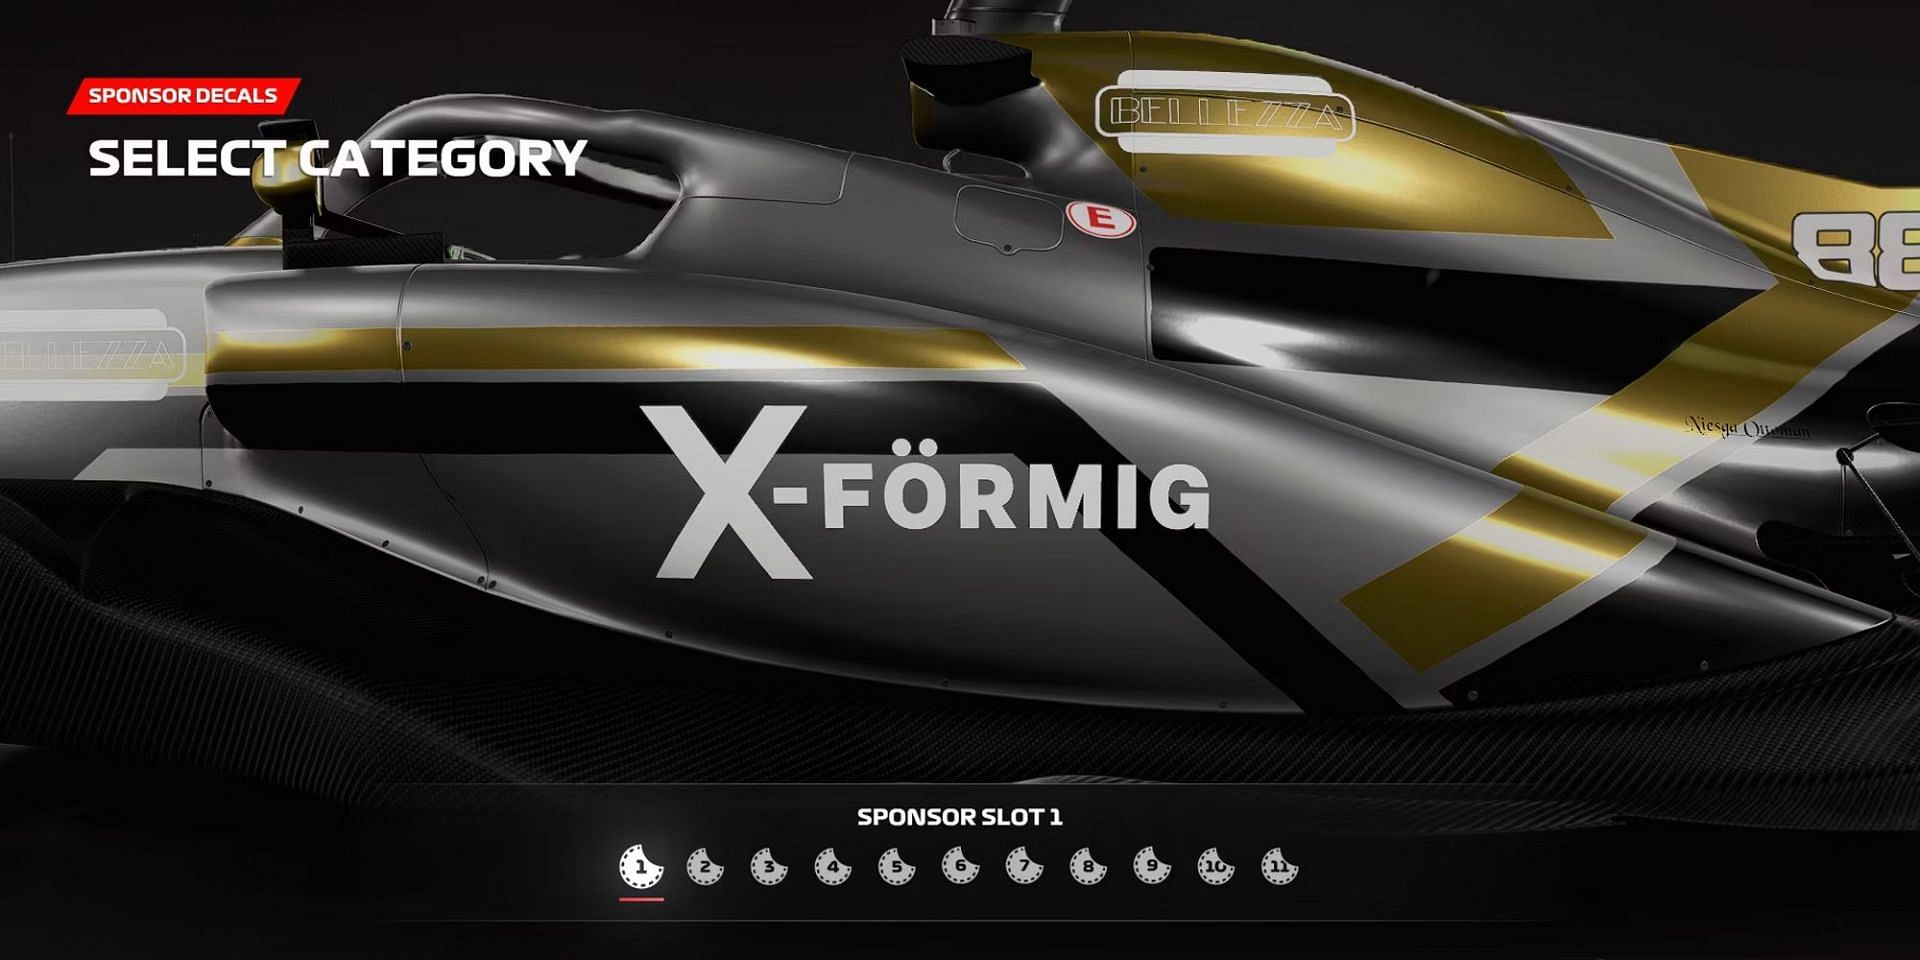 There are various sponsor logos to choose from in F1 23 (Image via Electronic Arts)